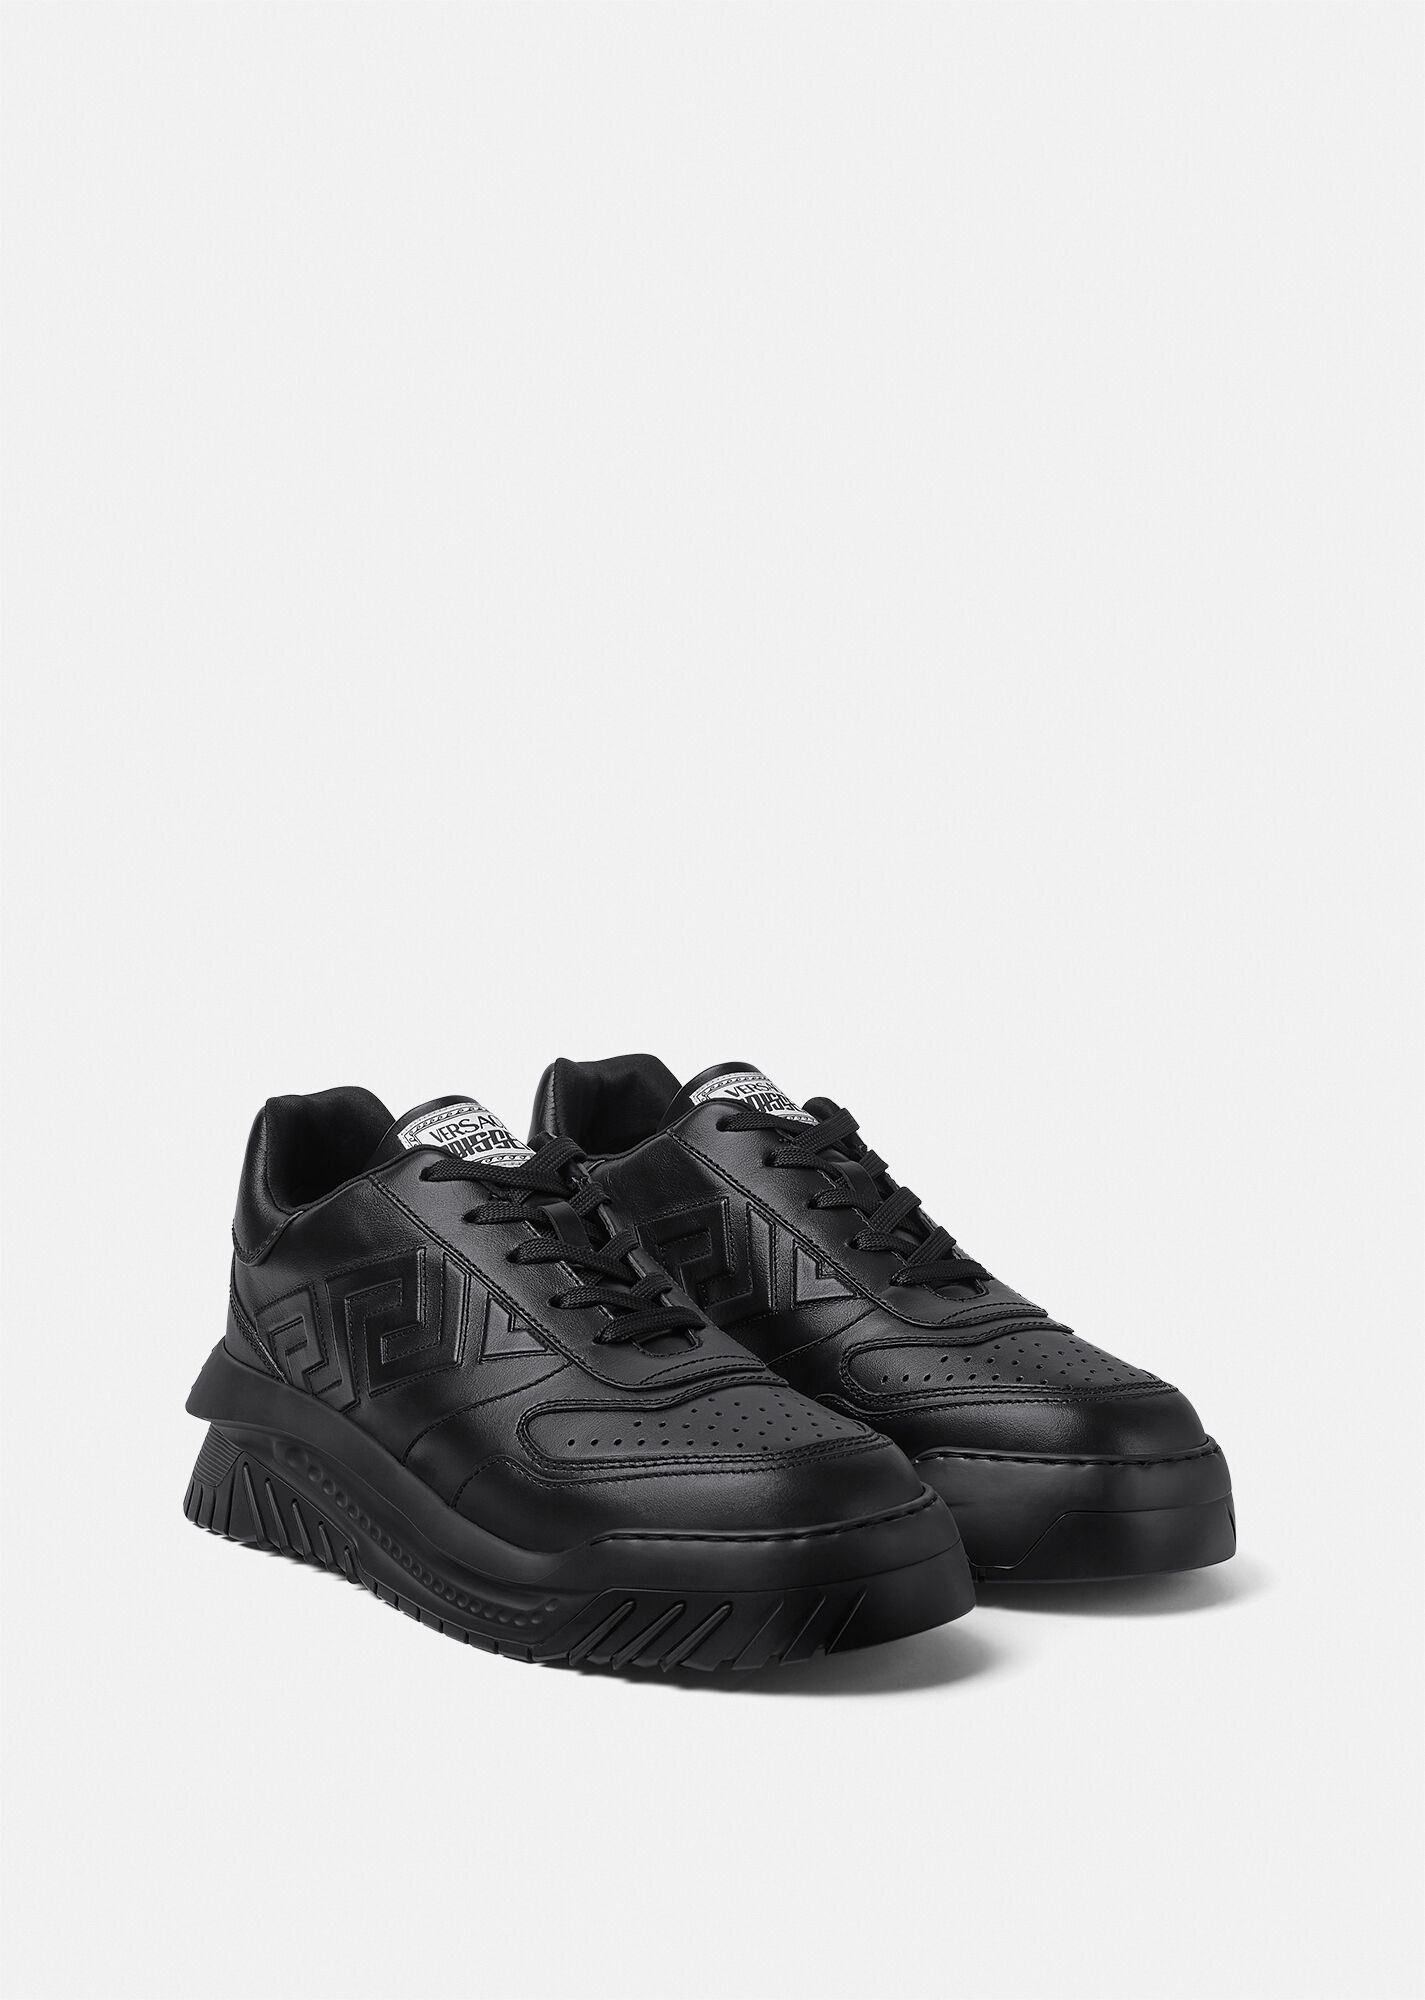 Odissea leather sneakers